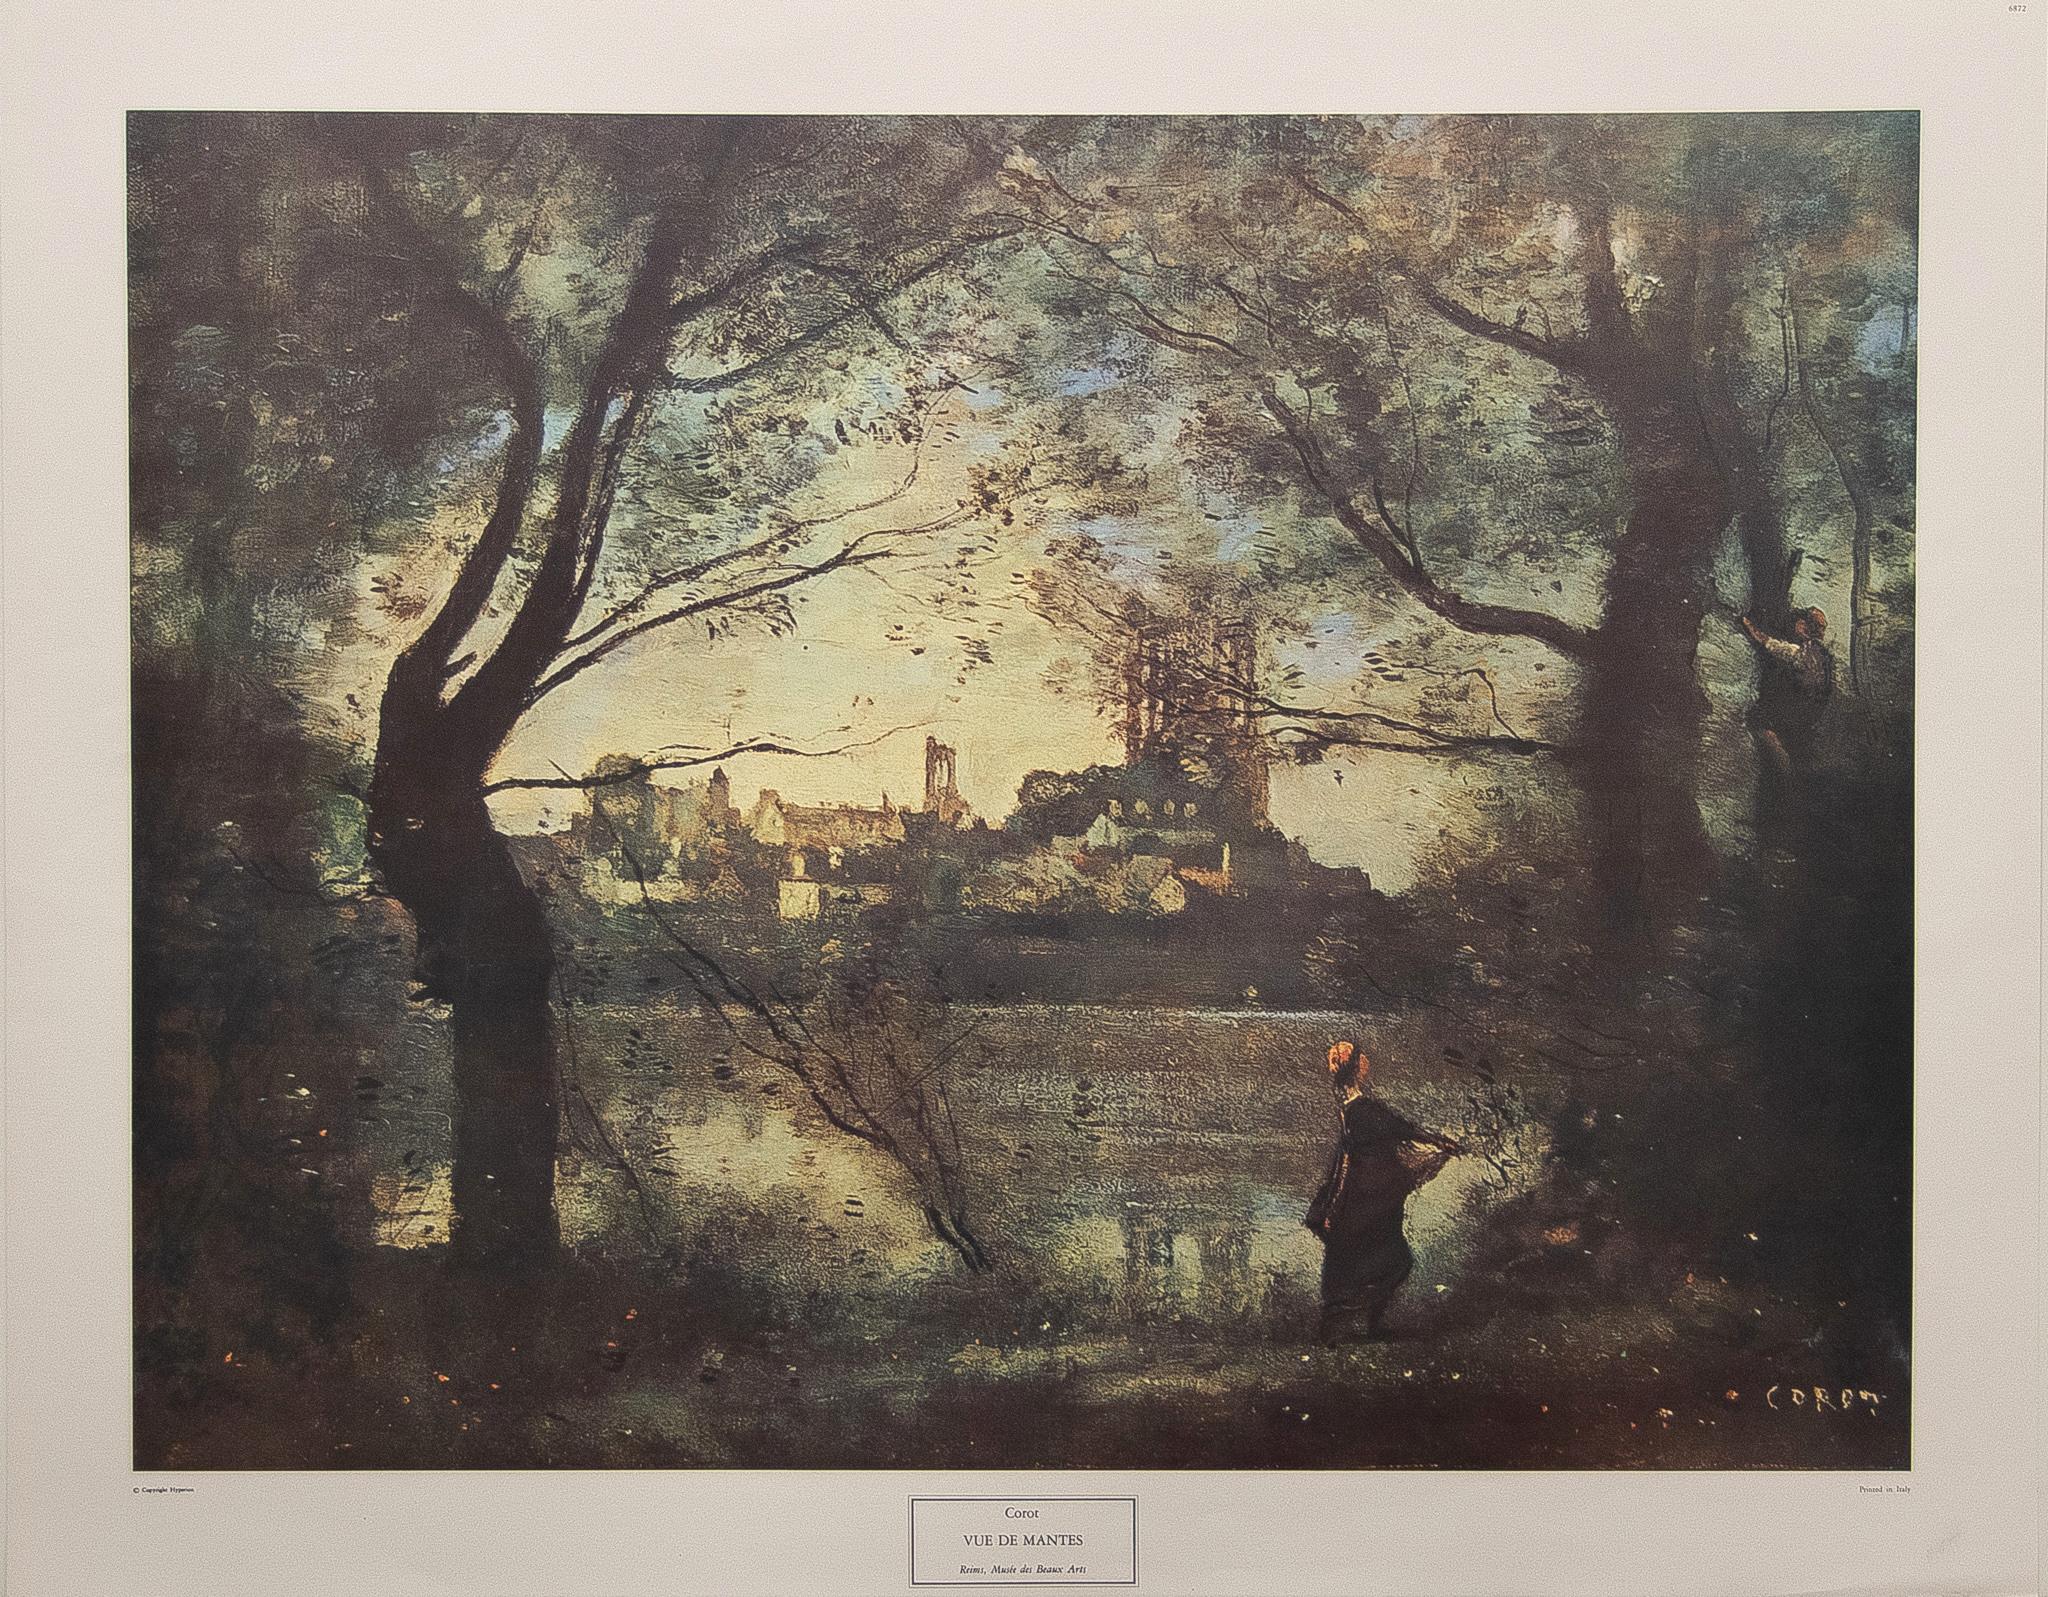 (after) Jean-Baptiste-Camille Corot Landscape Print - "Vue de Mantes" Lithographic Print. Created in Italy. 